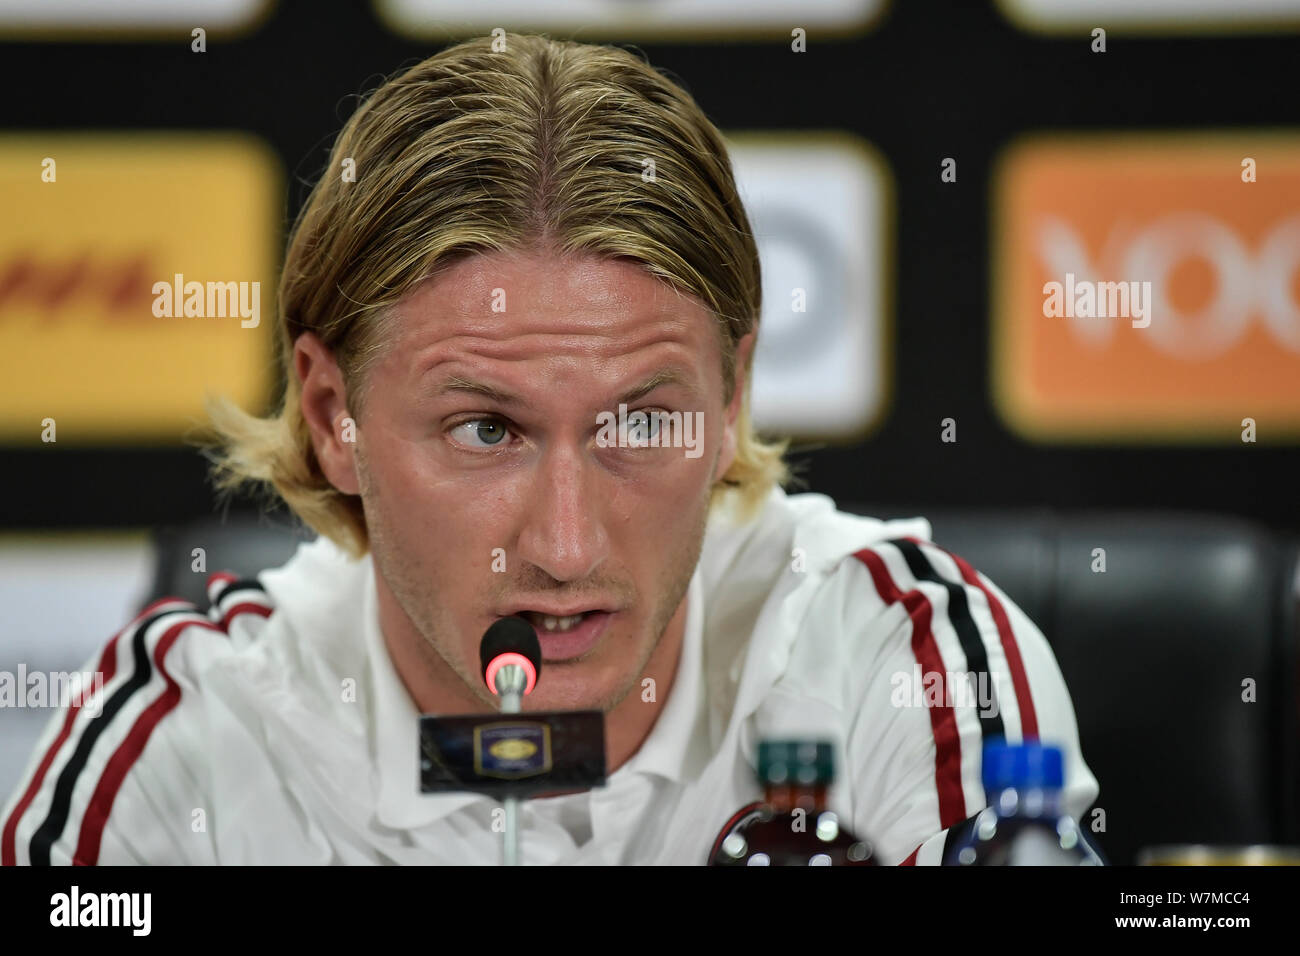 Italian football player Ignazio Abate attends a press conference for the Shenzhen match of the 2017 International Champions Cup China against FC Bayer Stock Photo